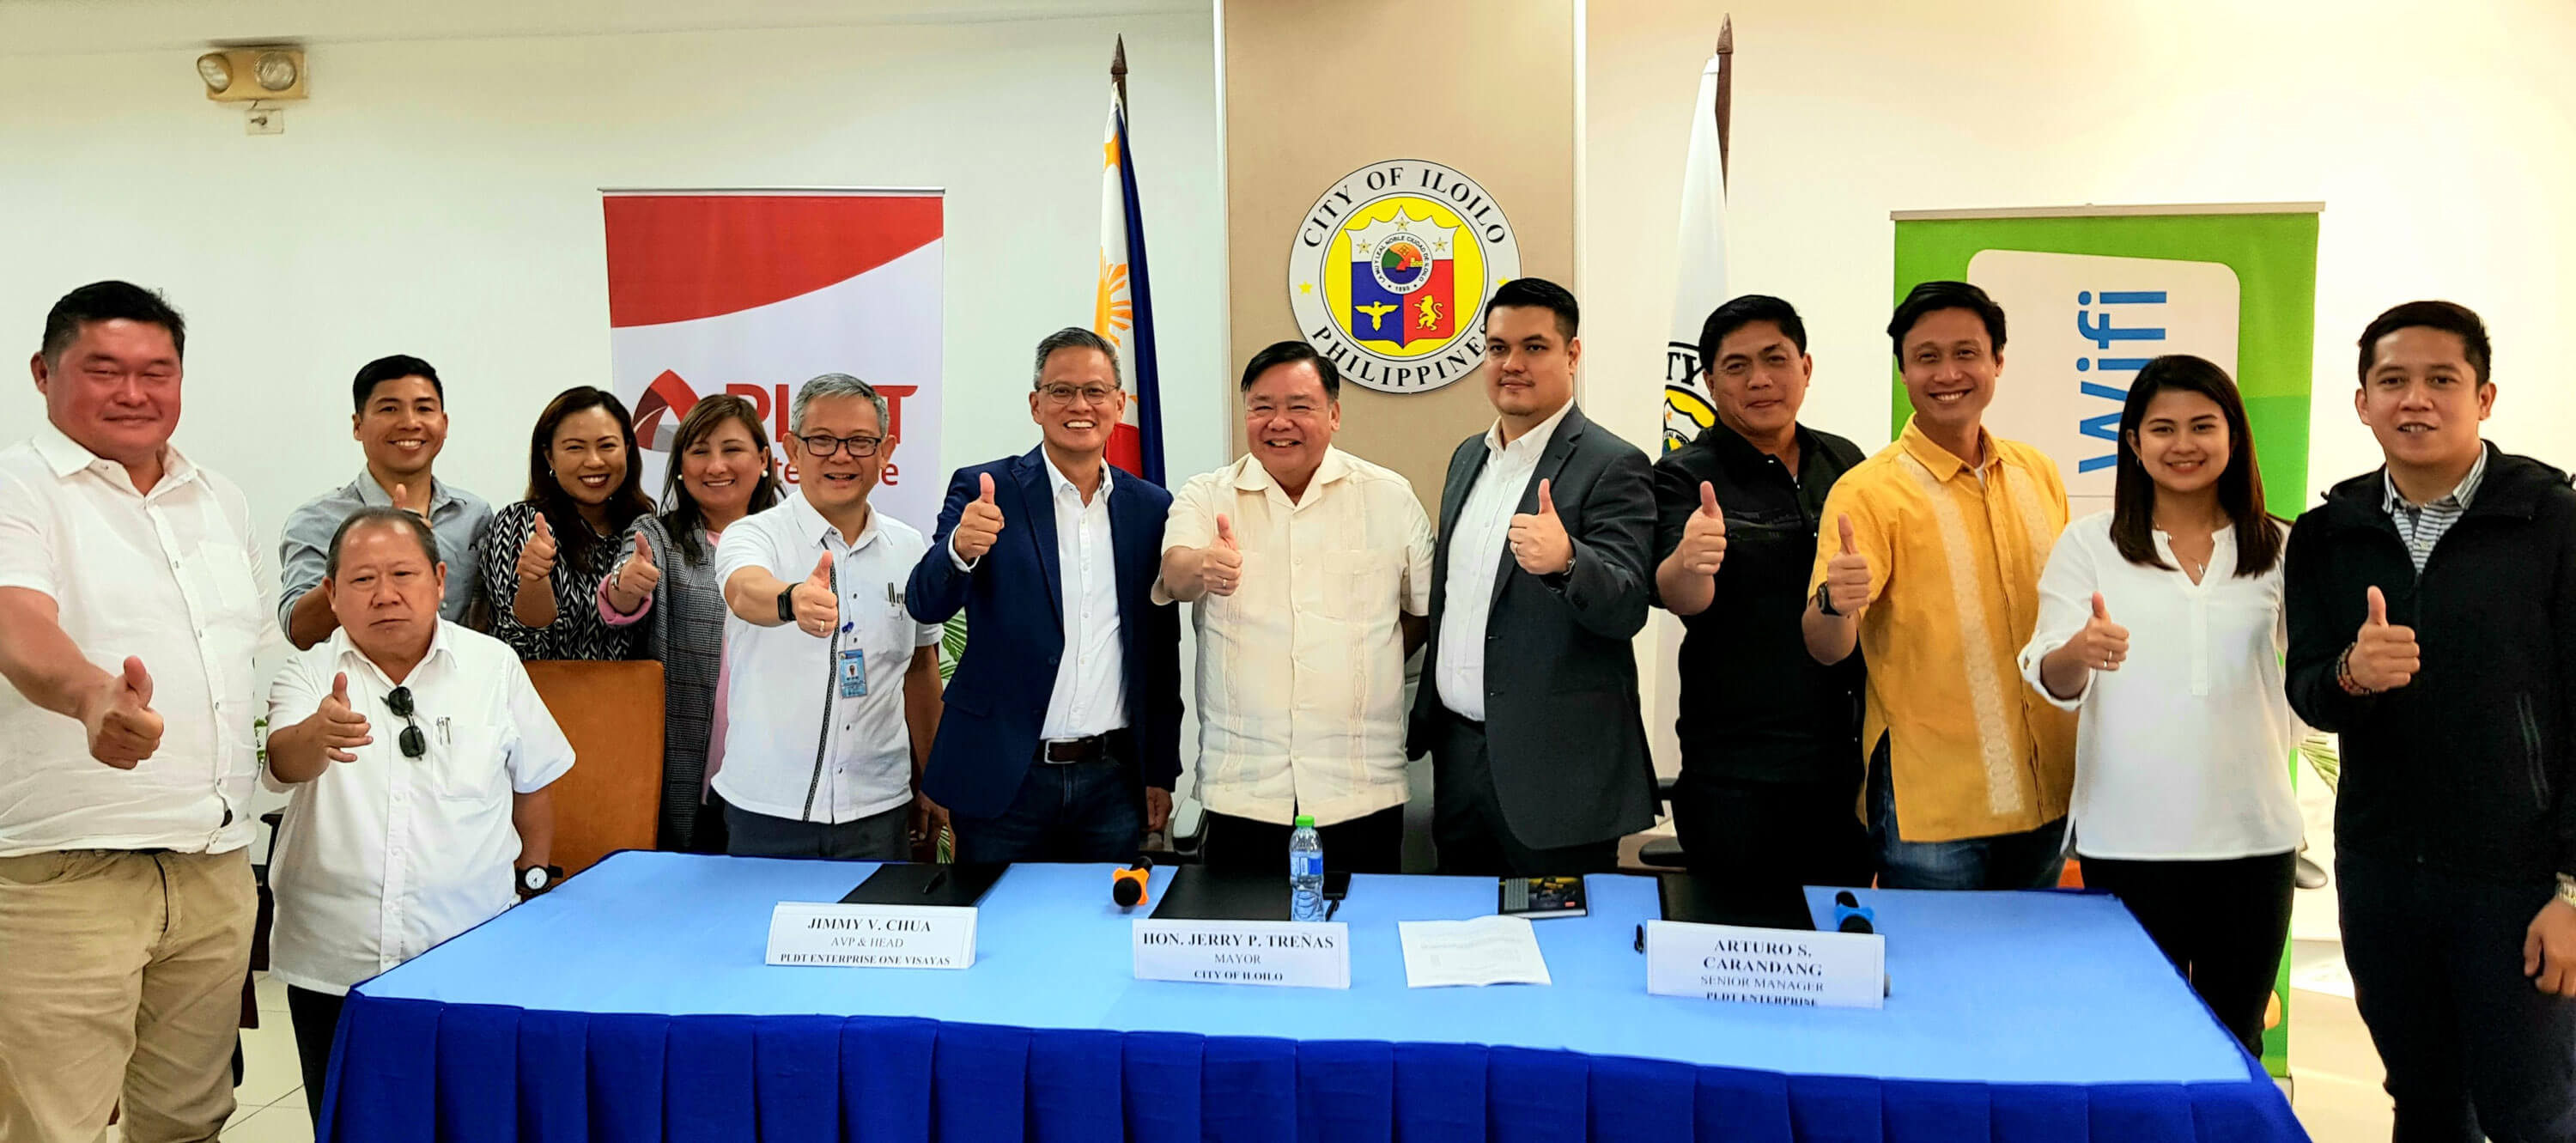 ILOILO ROLLOUT. Smart will install Google Station in the Iloilo City Hall, the Esplanade, La Paz Plaza, and Mandurriao Plaza, as well as in the Cultural Heritage Tourism Zones of Jaro Plaza Complex, Molo Plaza Complex and Plaza Libertad Complex.